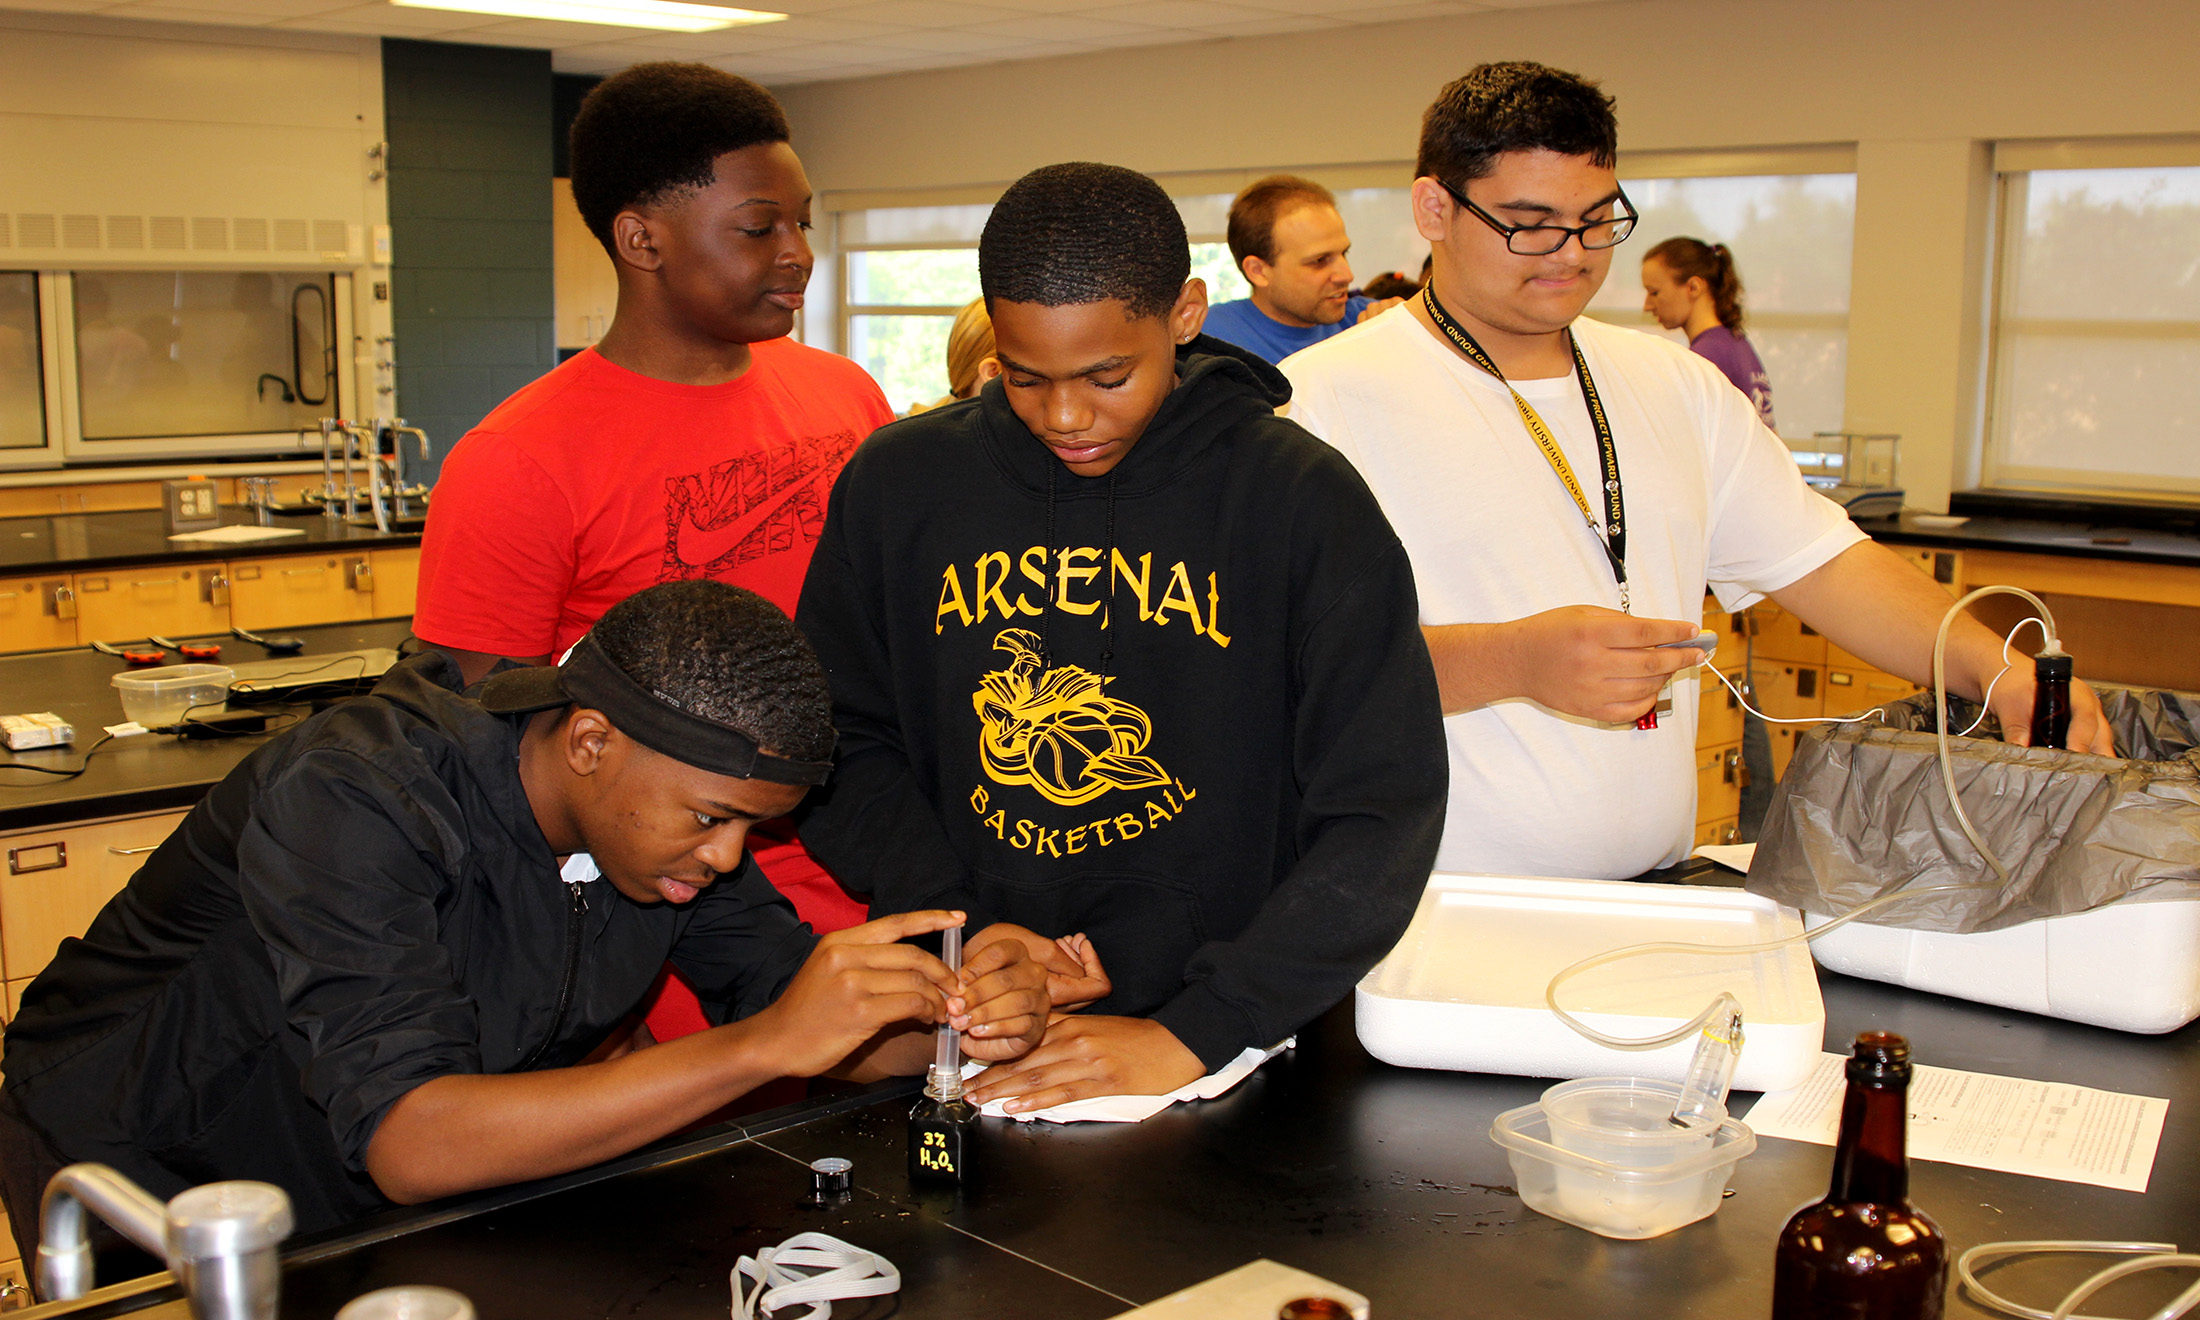 Project Upward Bound students explore sciences at OU under auspices of NSF grant 